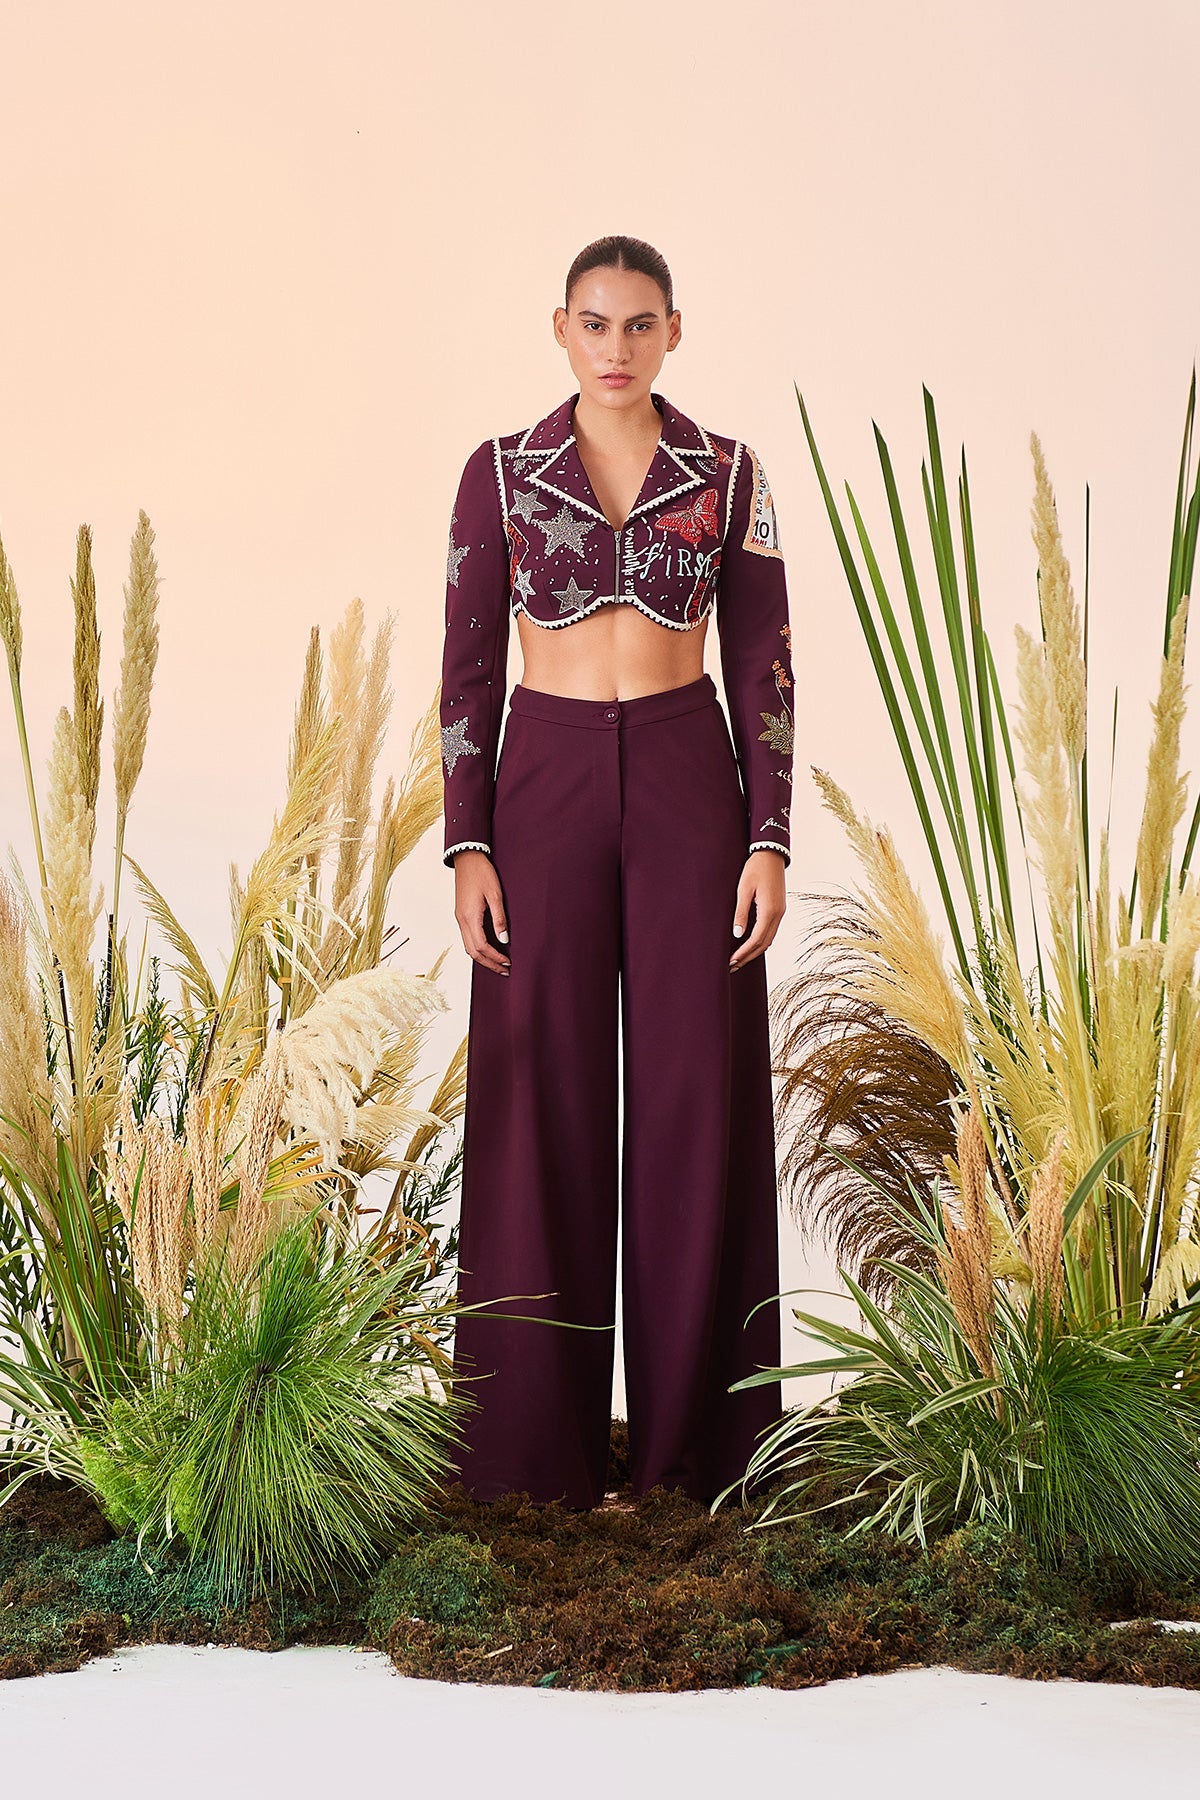 Asfa Sinha in Postcard Cropped Blazer And Flared Pant